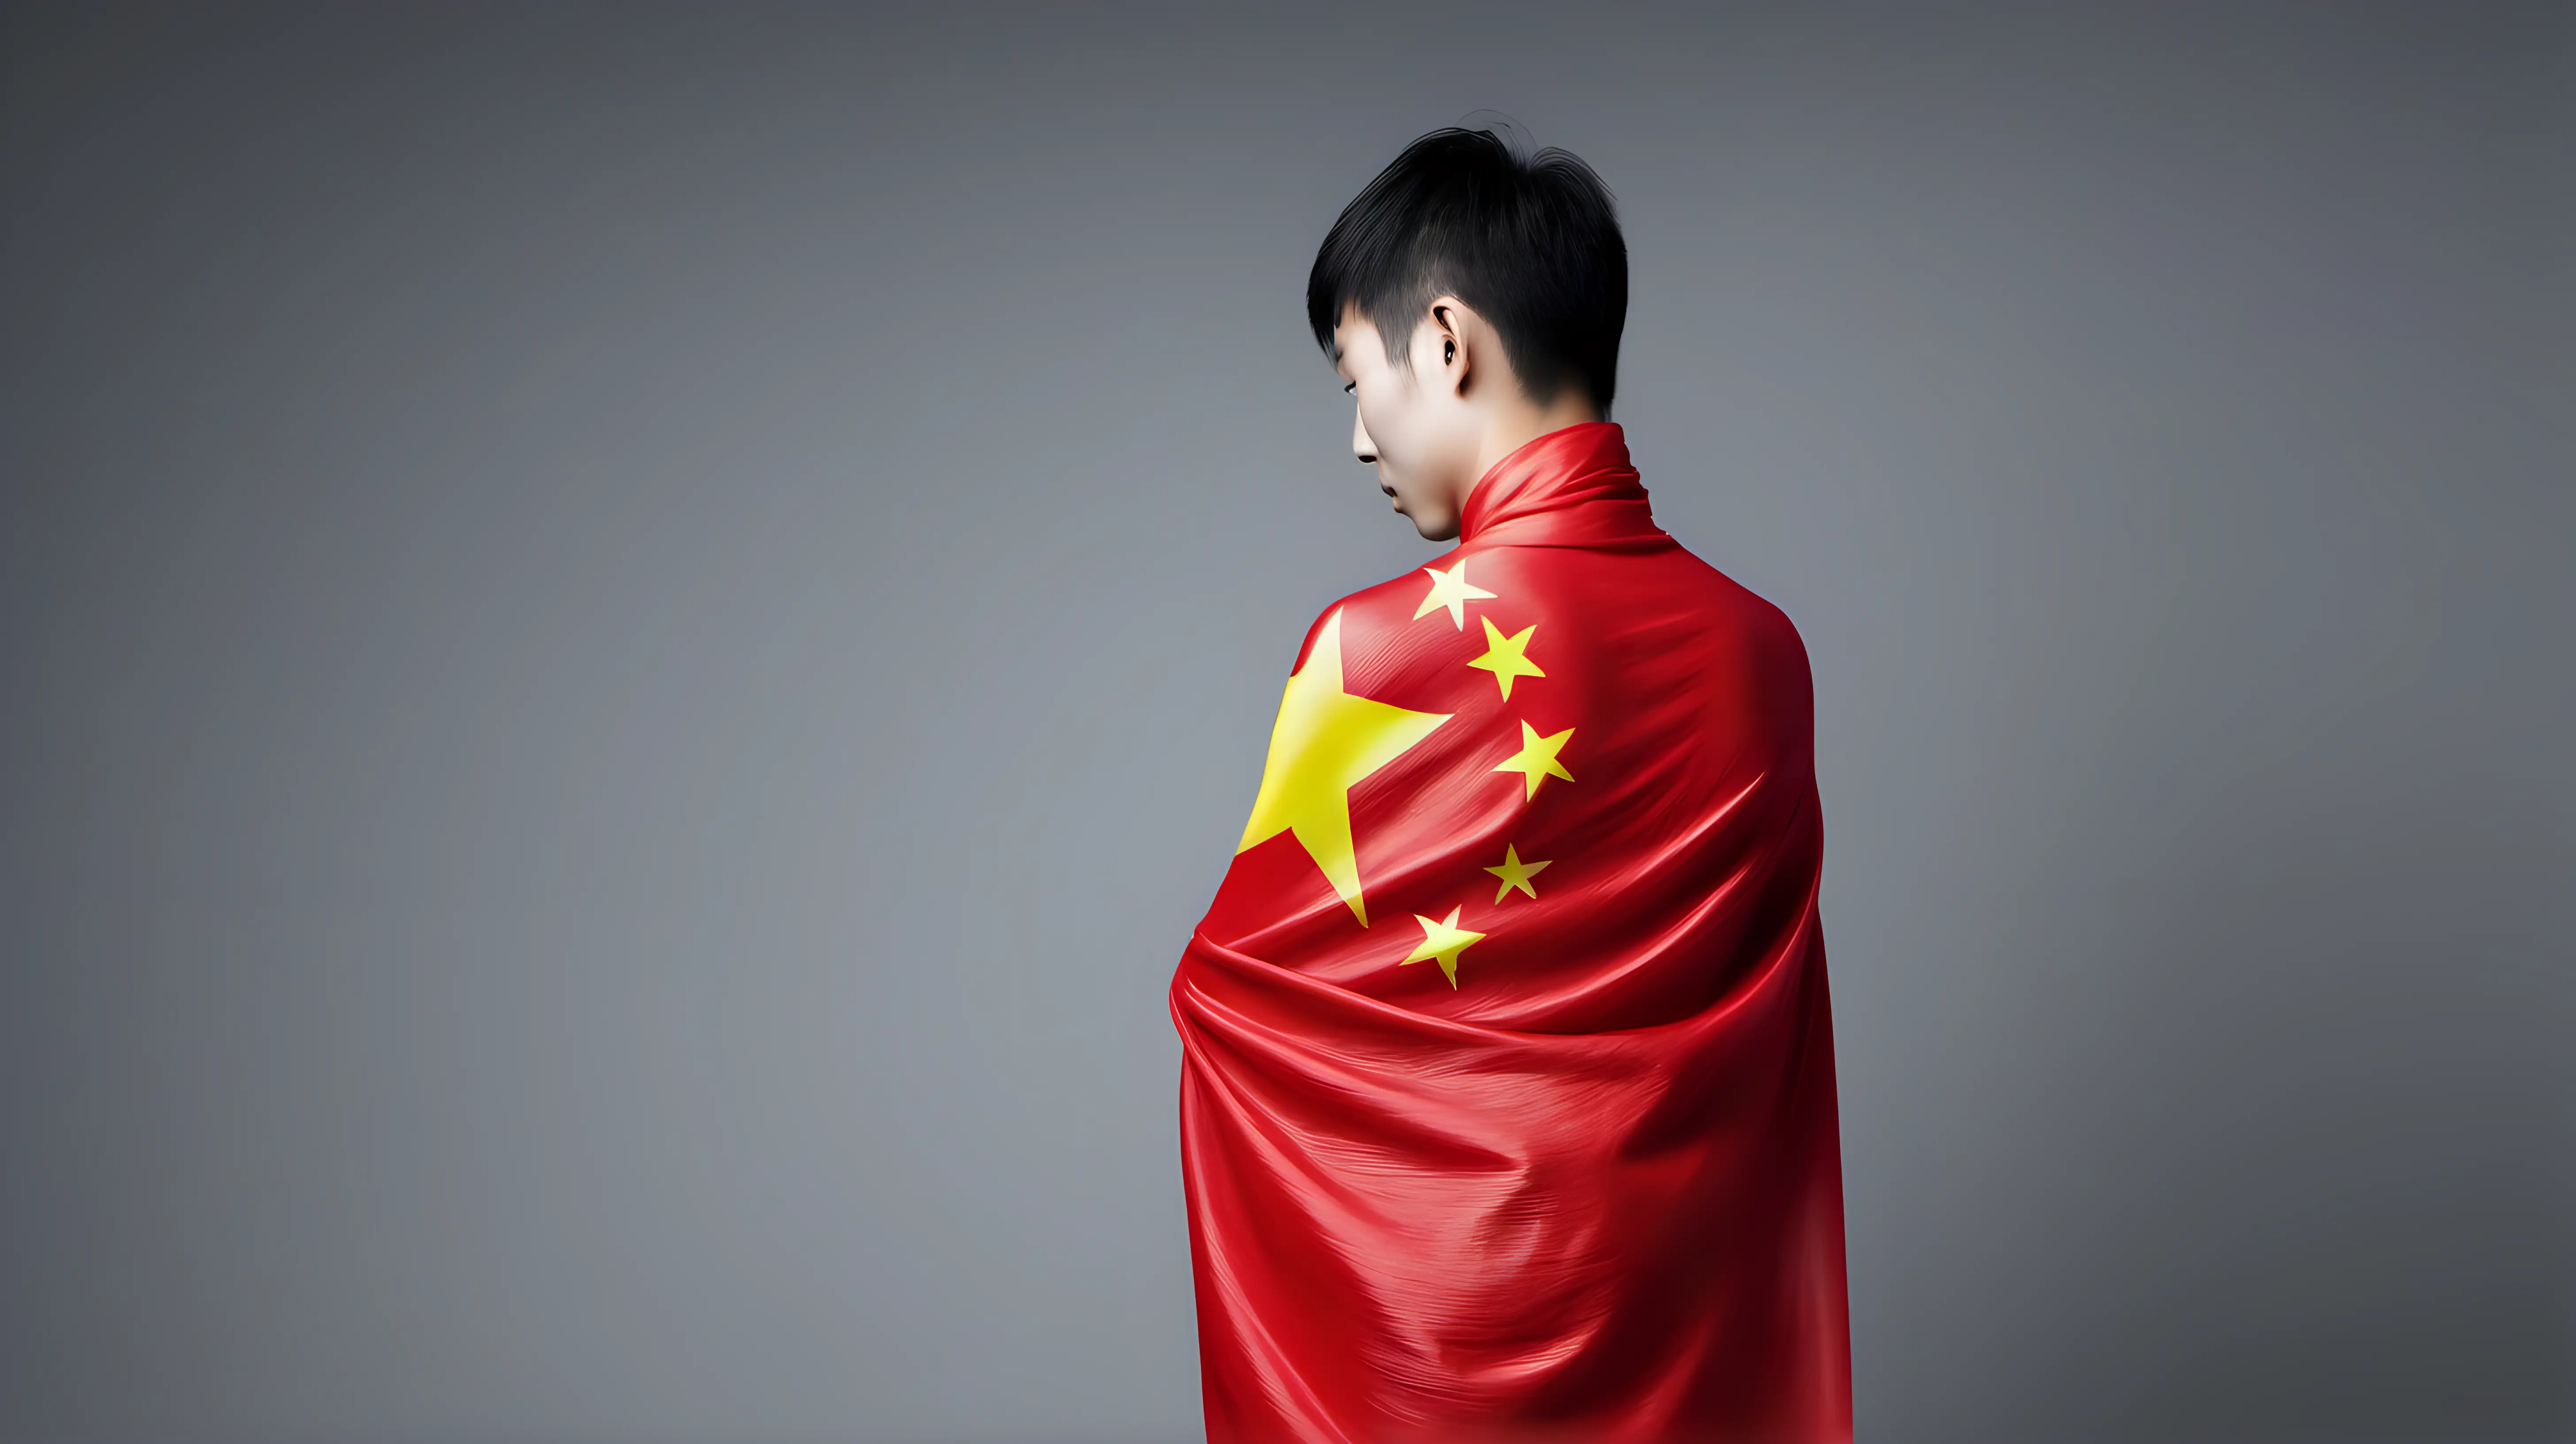 Patriotic Individual Wrapping in Chinese Flag with Strong National Pride